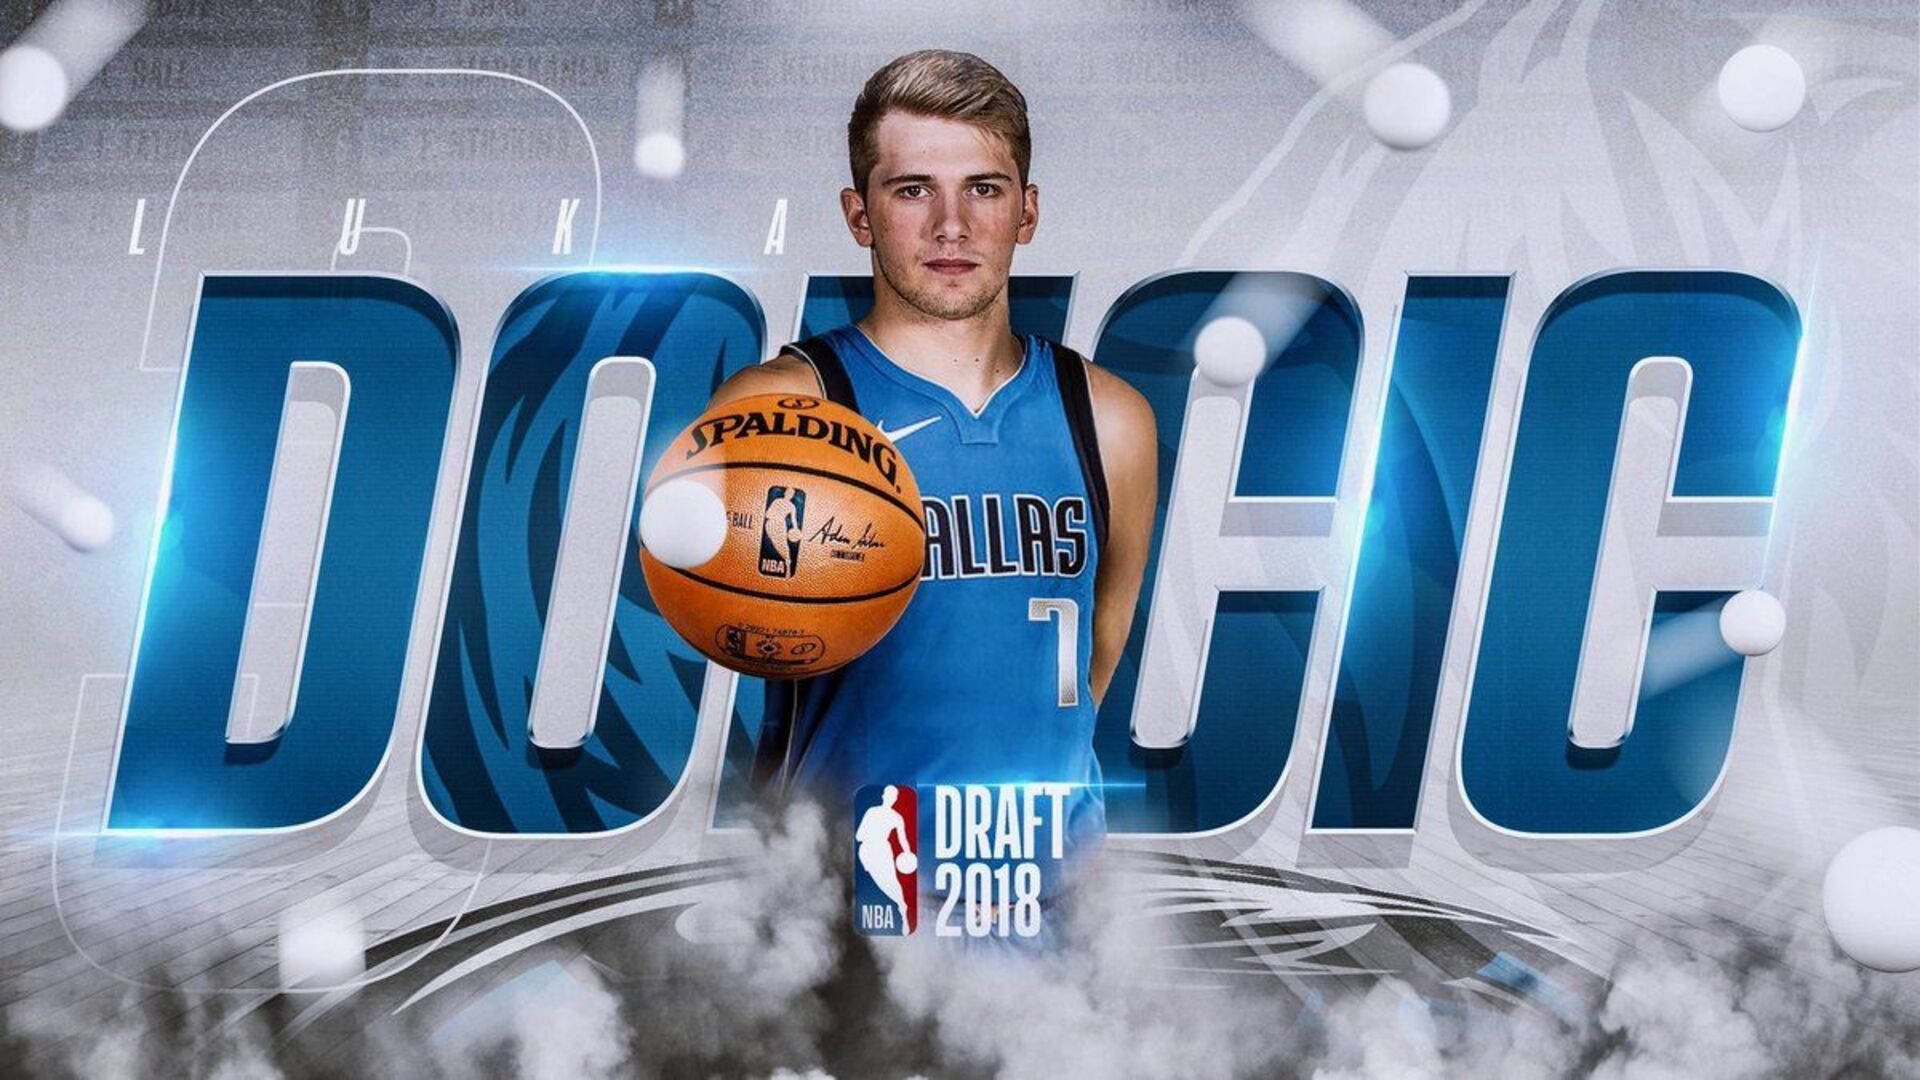 1920X1080 Luka Doncic Wallpaper and Background